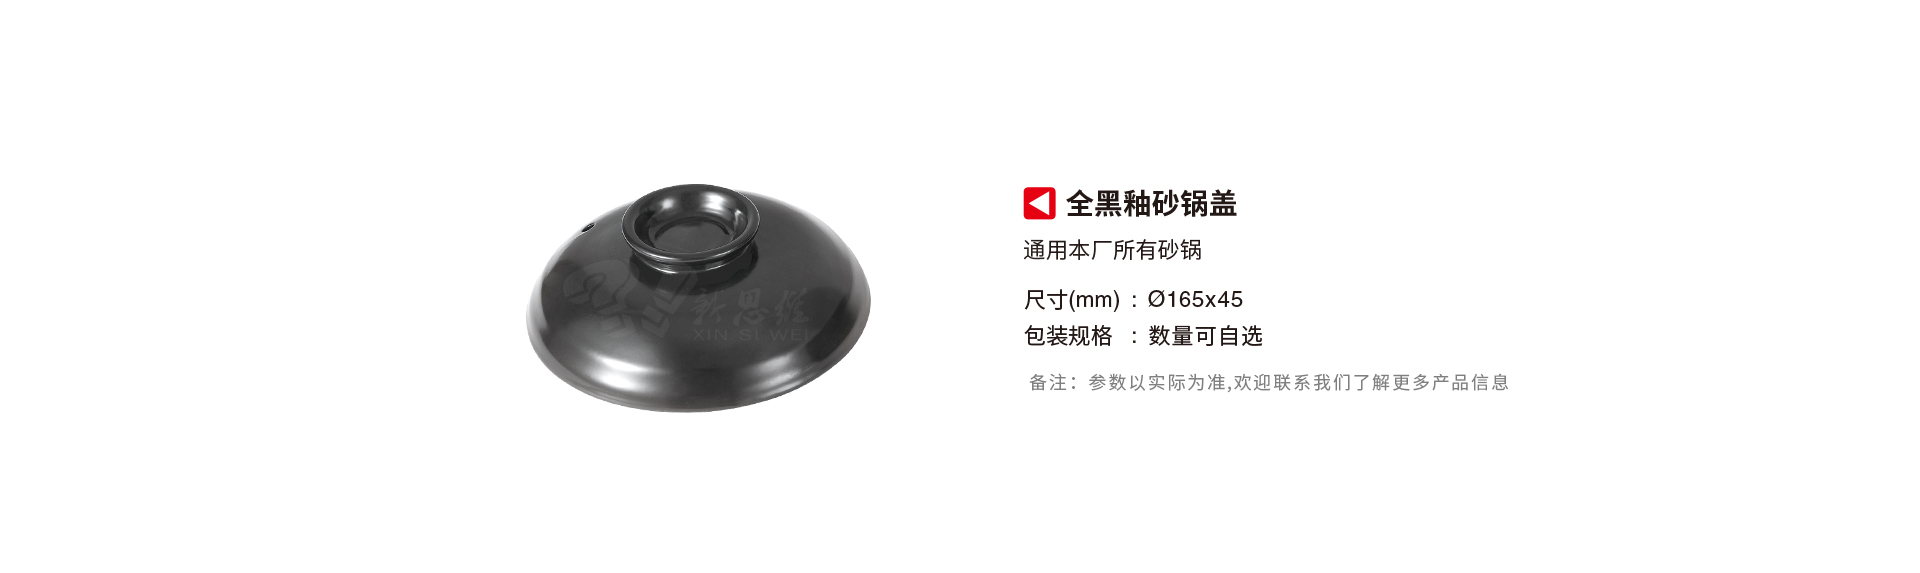 xinsiwei_supporing_materials_black_pottery_cover_product_parameters.jpg